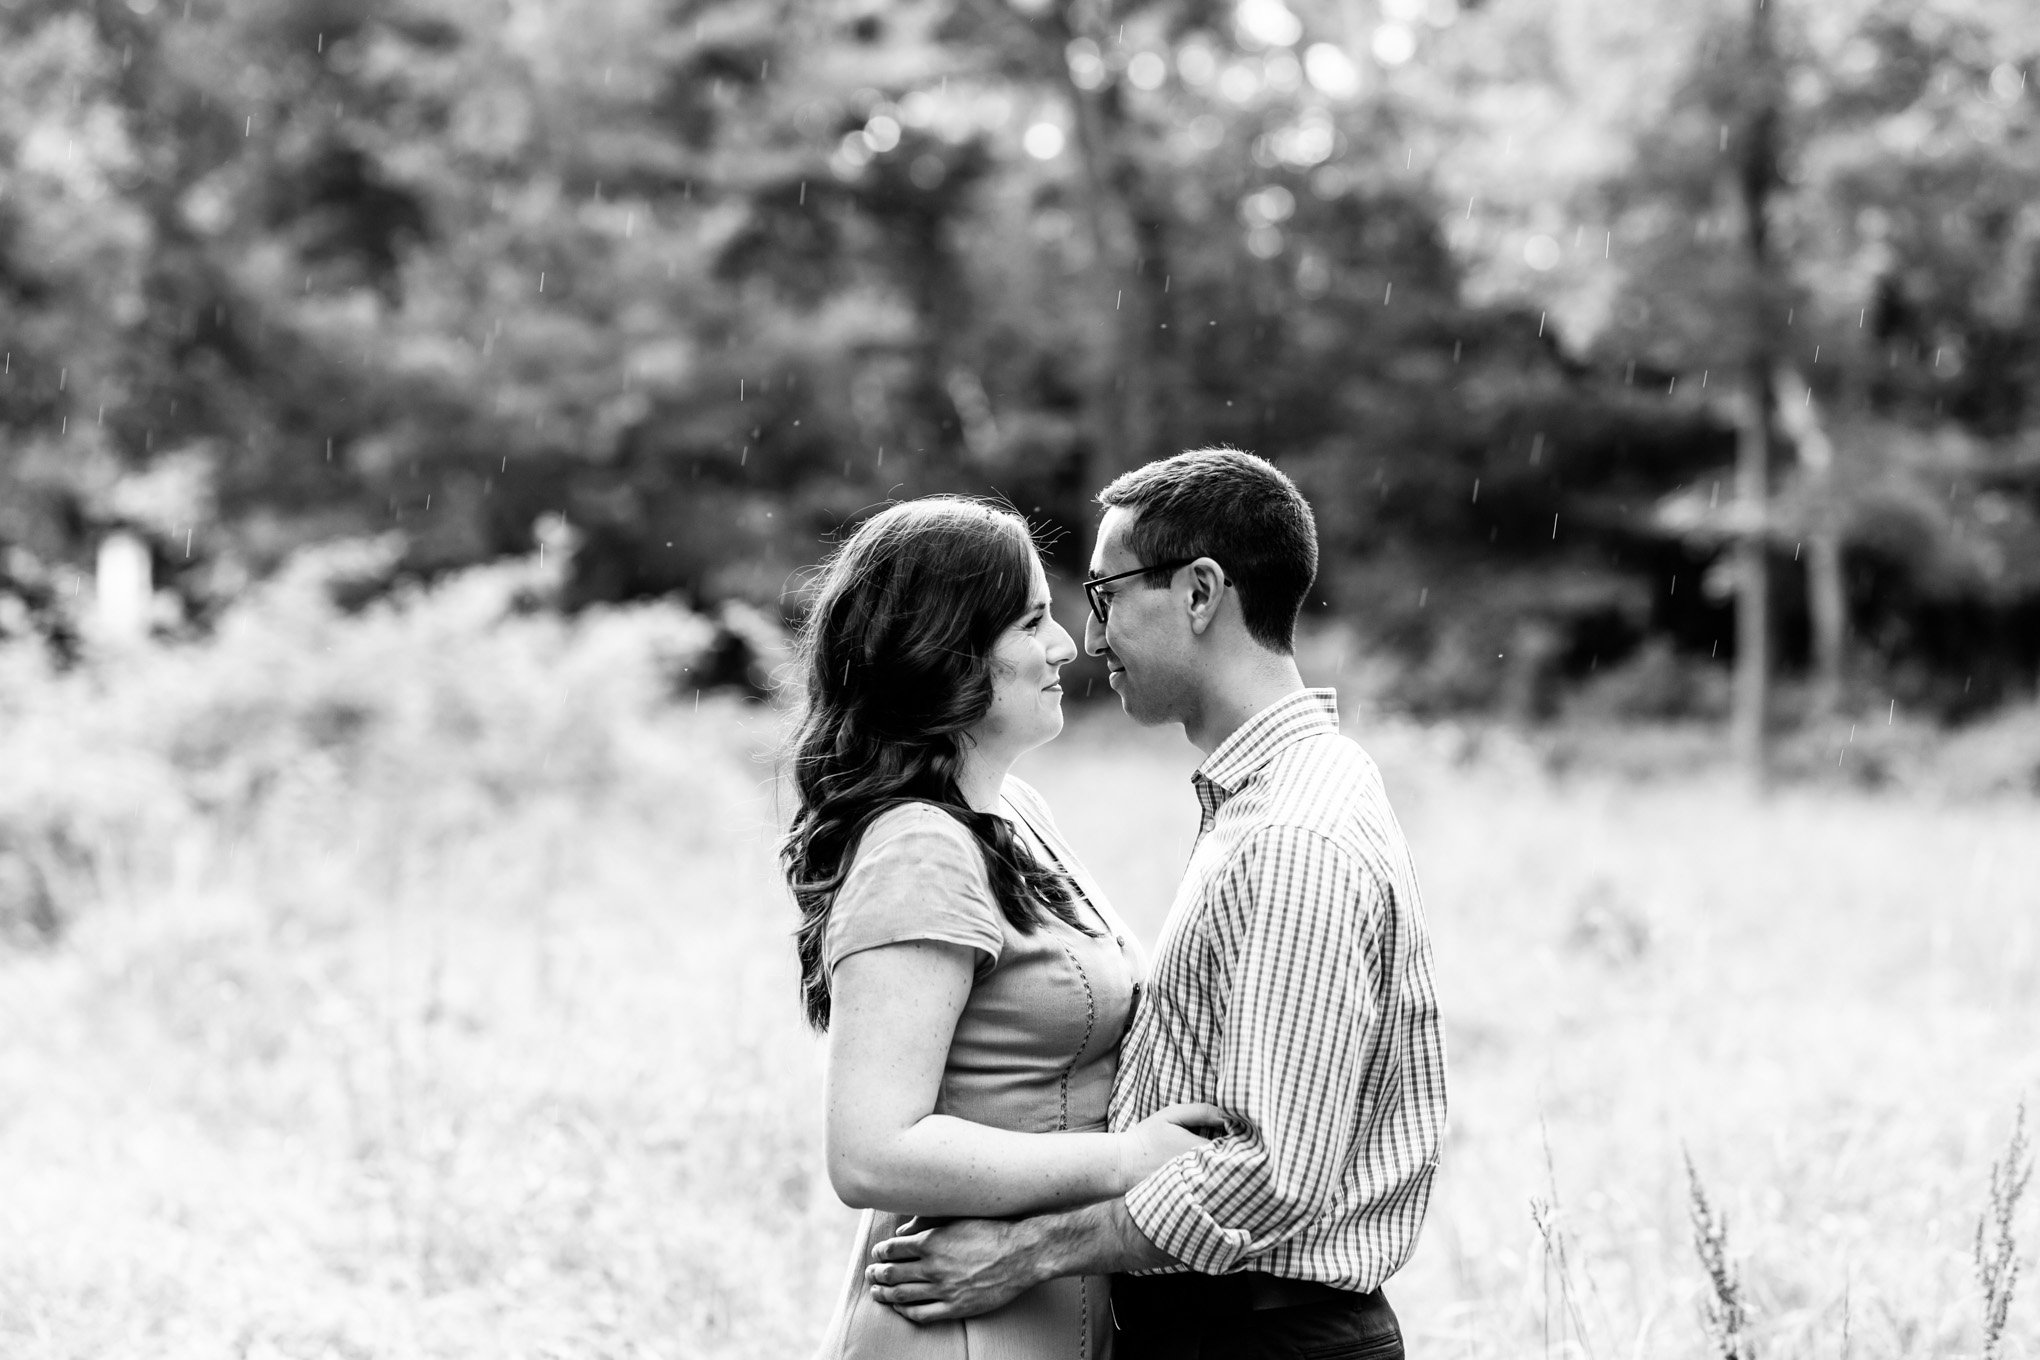 Great Falls Park engagement photos, Great Falls Park, Great Falls Virginia, national park, Great Falls, Great Falls engagement photos, Virginia engagement photos, Virginia engagement photographer, Rachel E.H. Photography, engaged couple, engagement session style, outdoorsy engagement photos, hiking engagement photos, black and white engagement photos